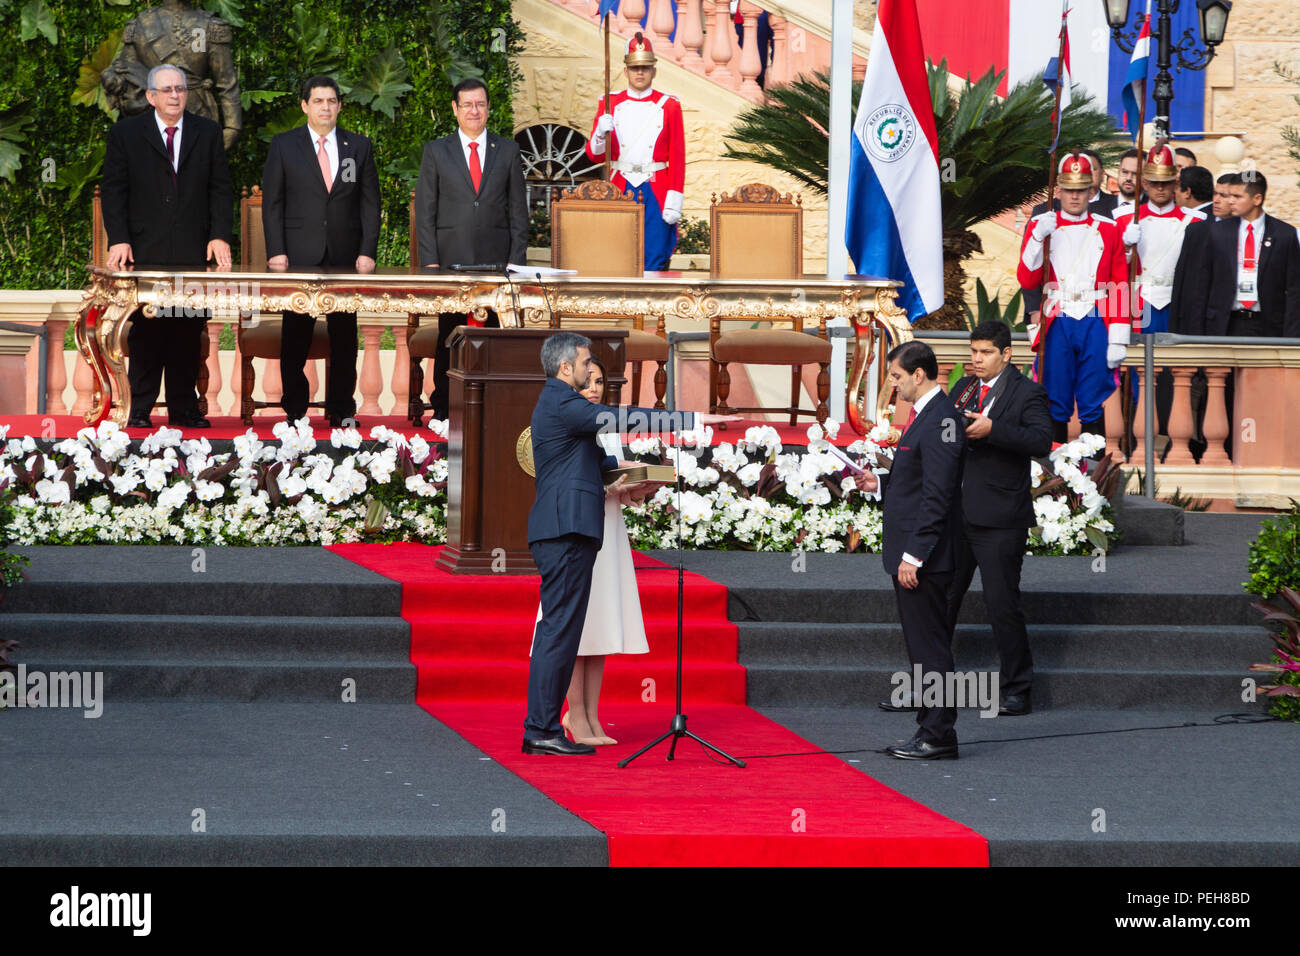 Asuncion, Paraguay. 15th Aug, 2018. Paraguay's new President Mario Abdo Benítez sworn-in by the president of the Paraguayan Congress Silvio Ovelar, during his inauguration ceremony at the esplanade of the Palace of Lopez in Asuncion, Paraguay. Credit: Andre M. Chang/Alamy Live News Stock Photo